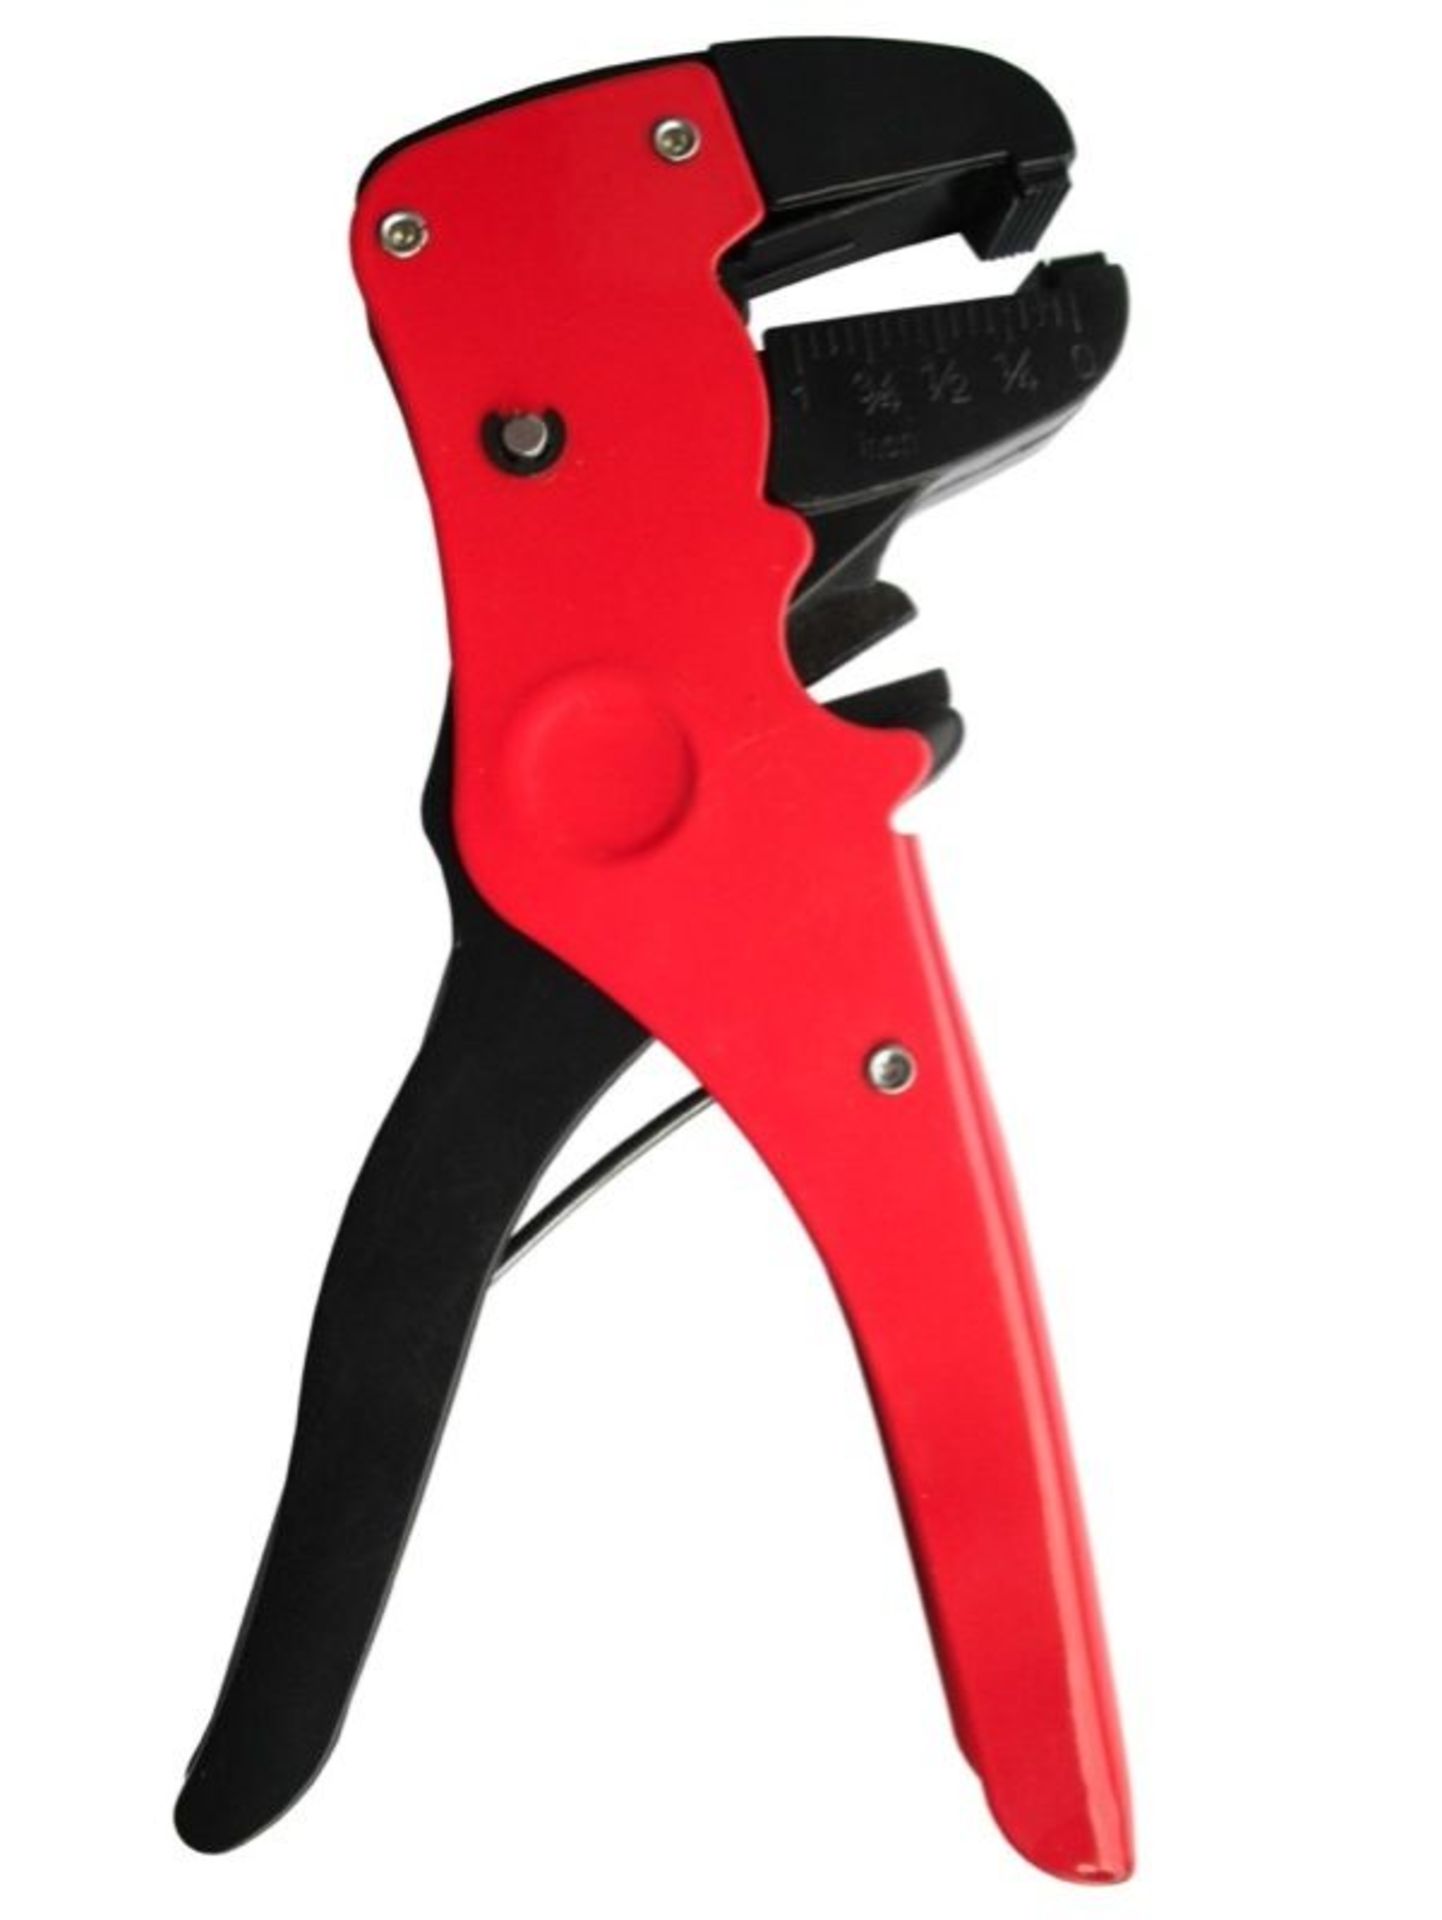 V *TRADE QTY* Brand New Automatic Wire Stripper And Cable Cutter For 0.5 mm to 4.0 mm Wire -